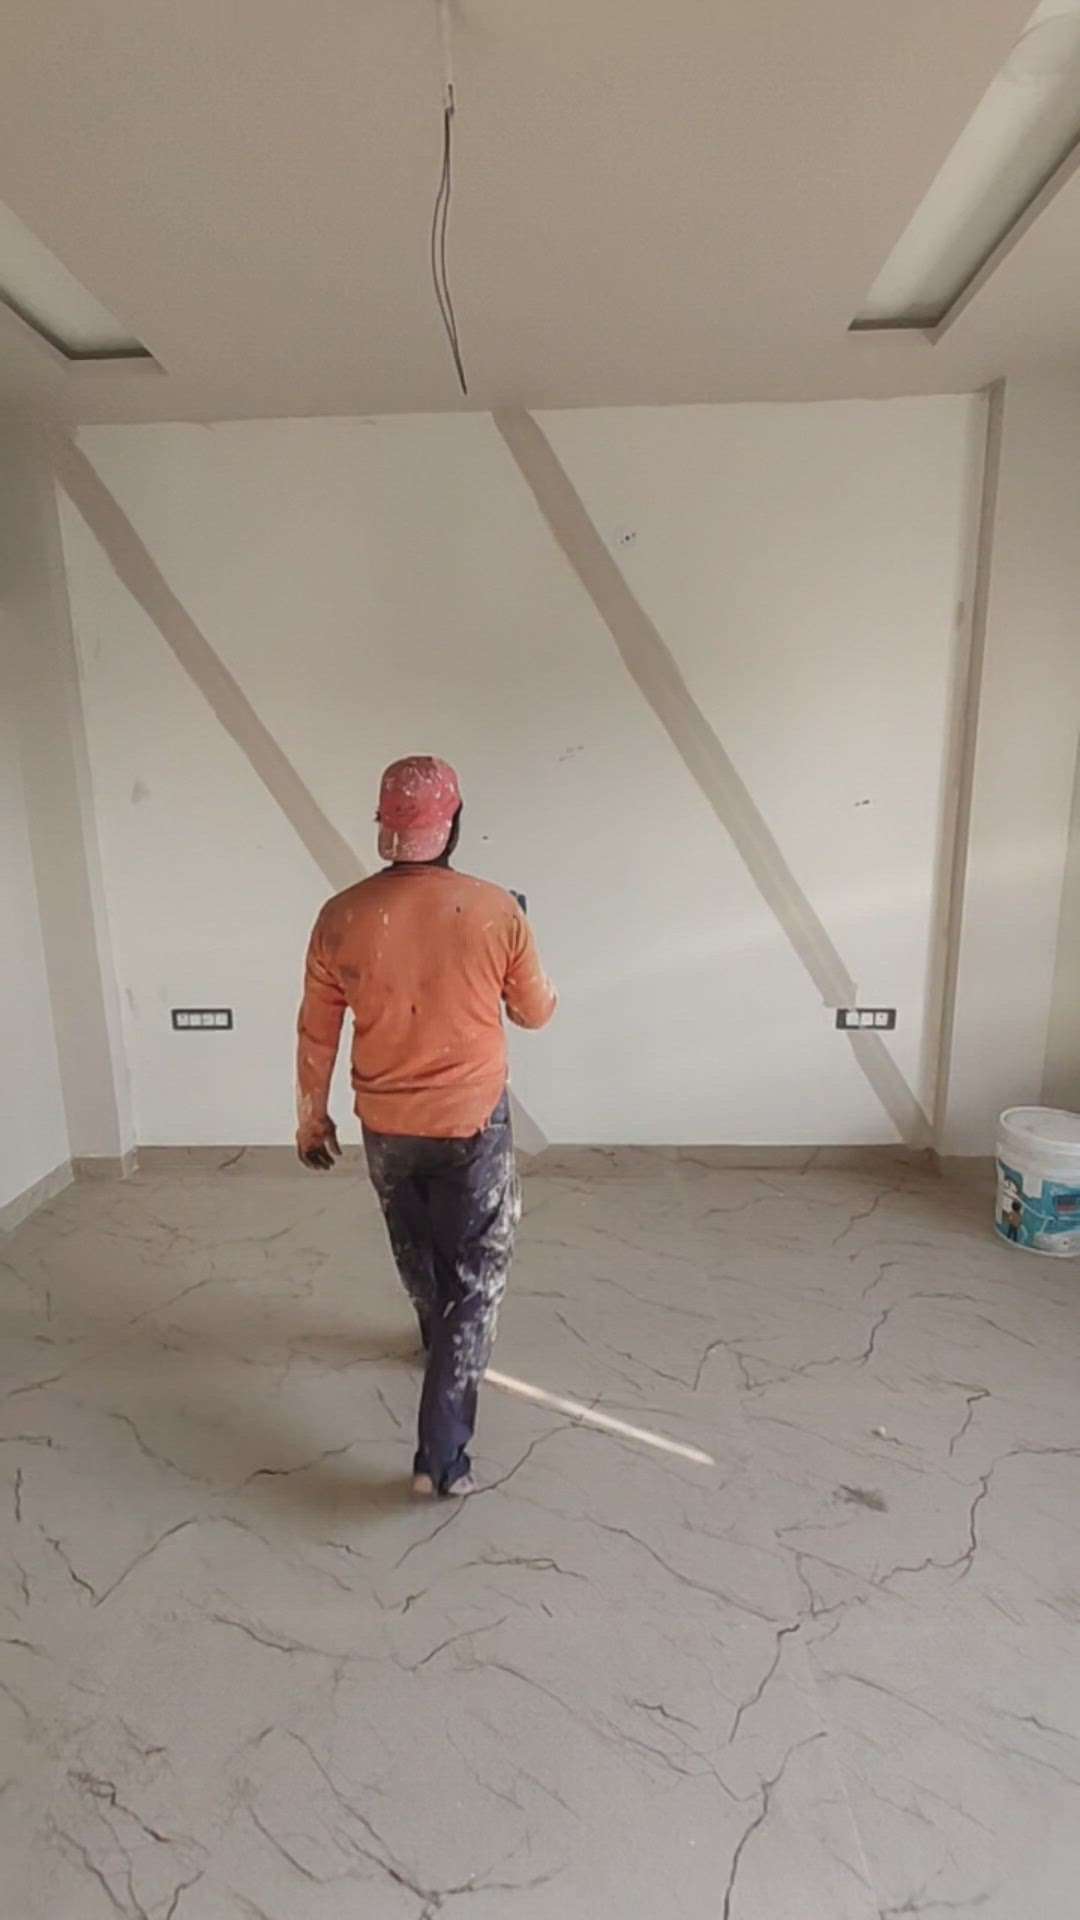 Wait for our Painter bhaiya's smile :) 

Dreamwalls painting services team believe's in empowering it's painting workforce to the fullest 👷👩‍🏭
.
.
.
.
.
Contact us to convert your space into your dream space using our expert painting services. 
.
.
.
.
.
.
#paintingservices #paintingcontractor #interiordesign #skilldevelopment #empowering #dreamwallservices #walltransformation #transmission #geometryart